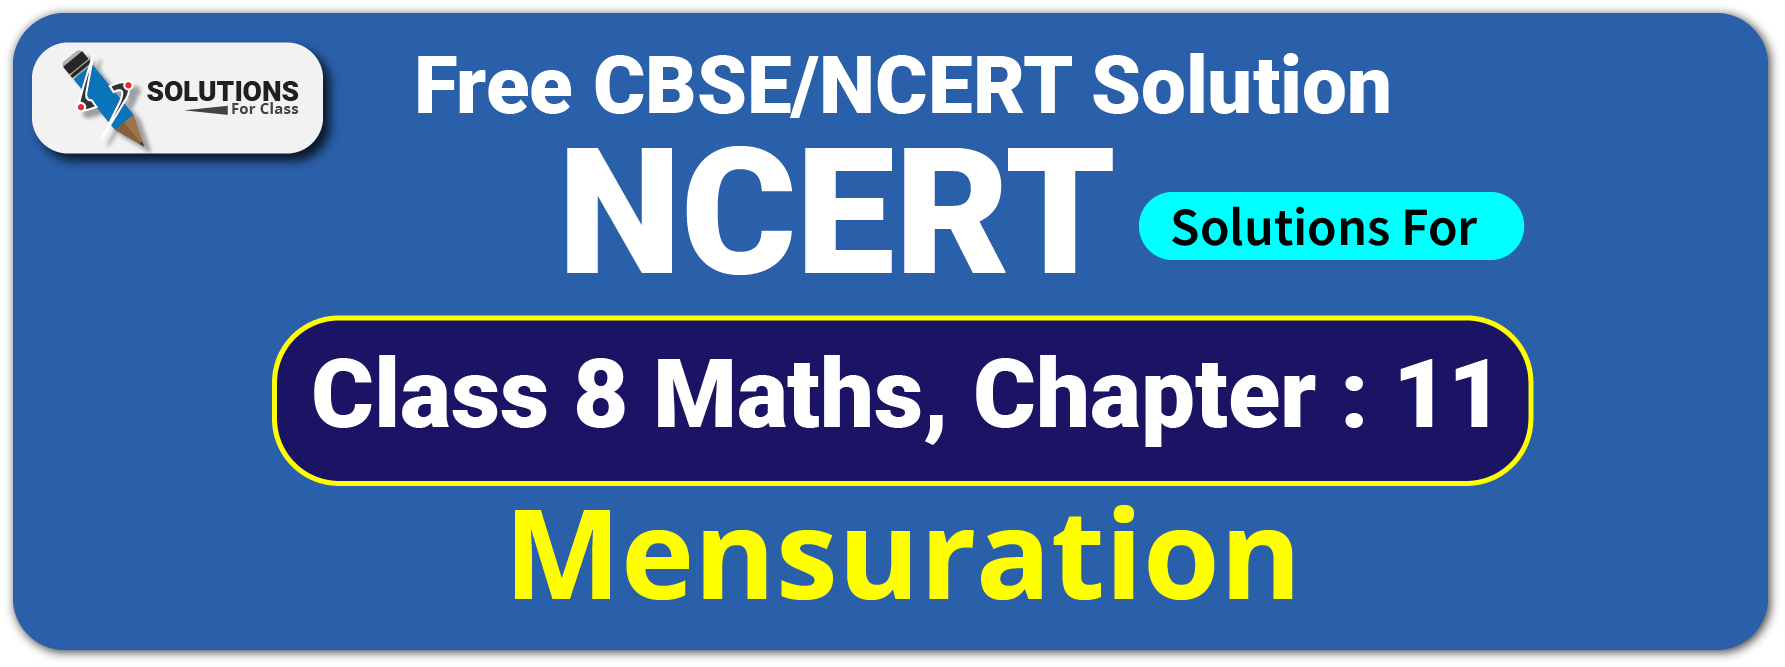 NCERT Solutions For Class 8 Chapter 11, Mensuration